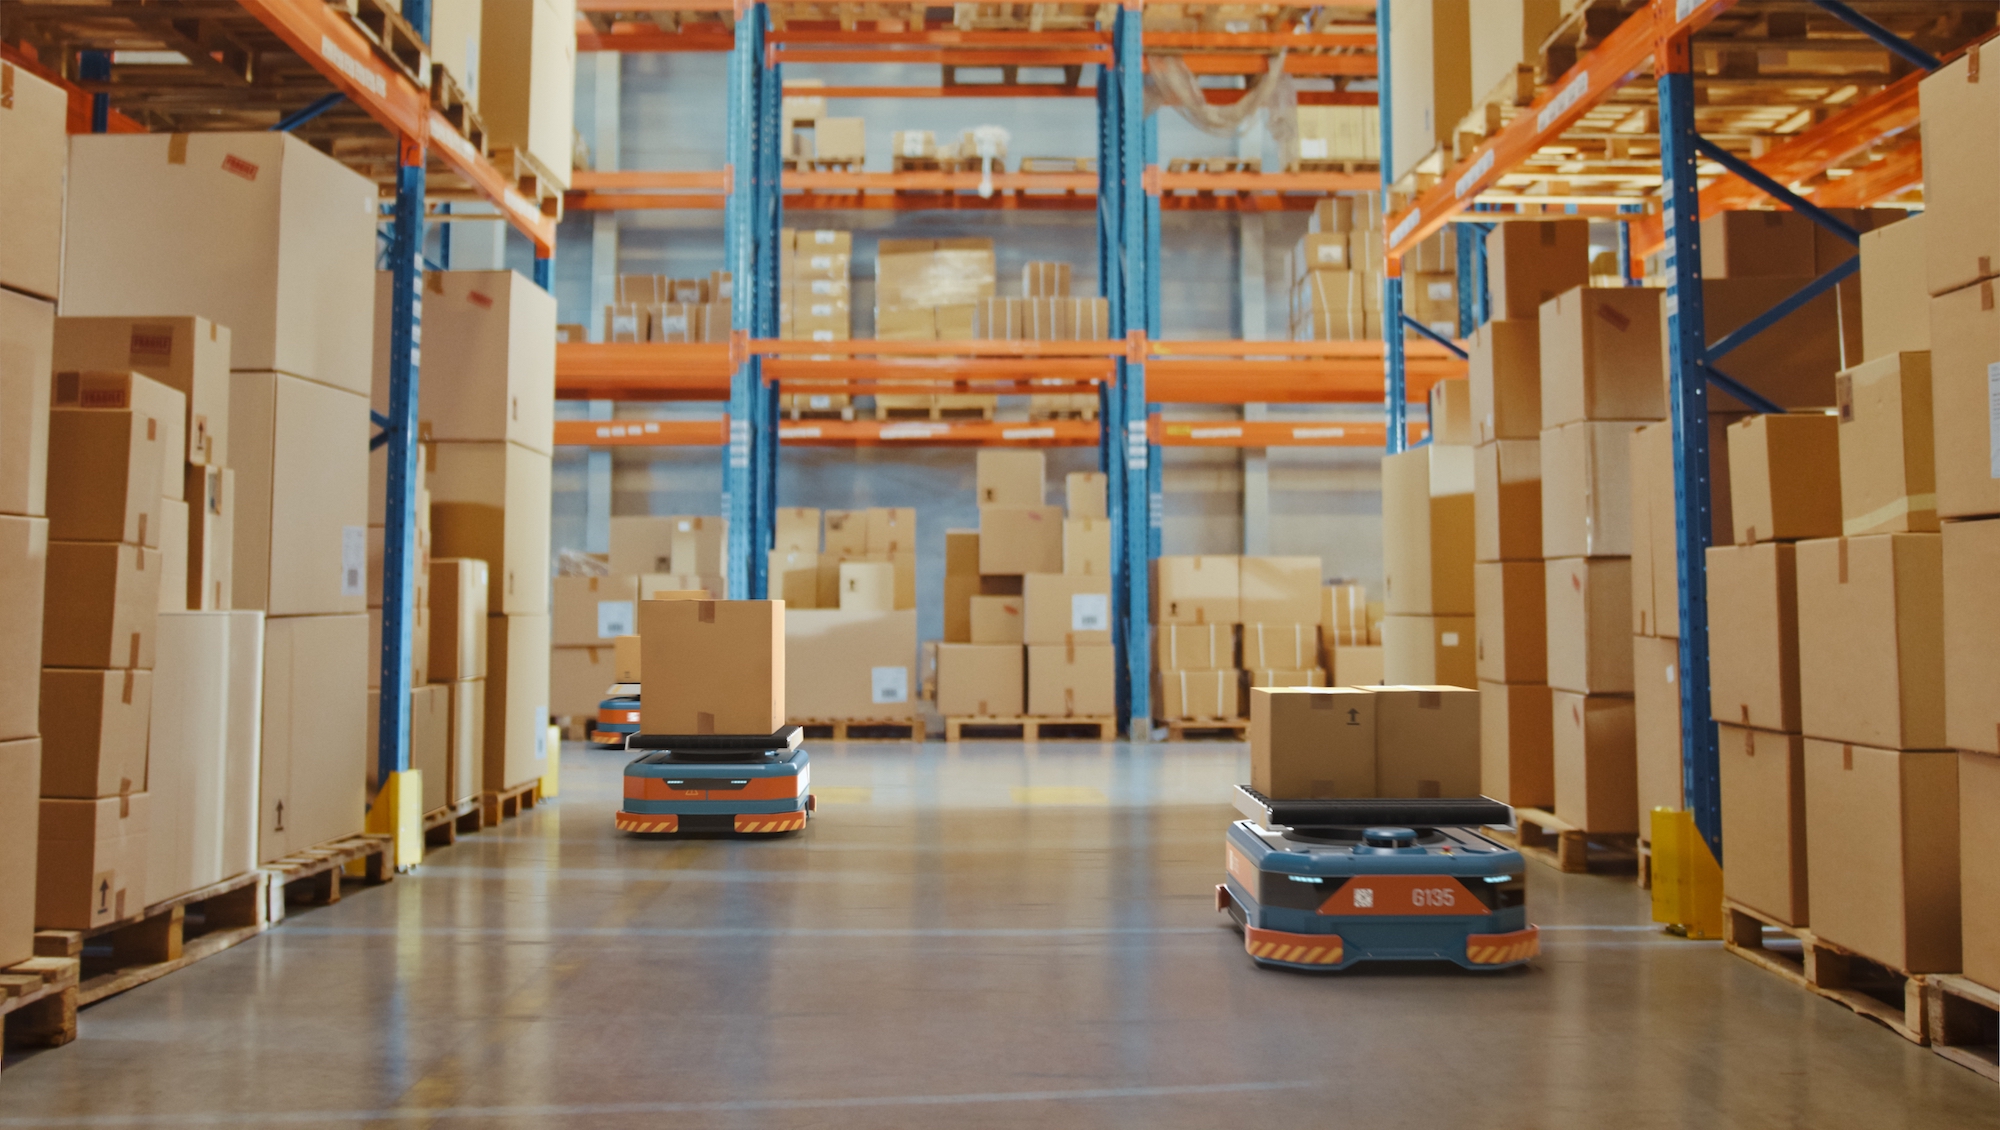 Warehouse robots are pictured.